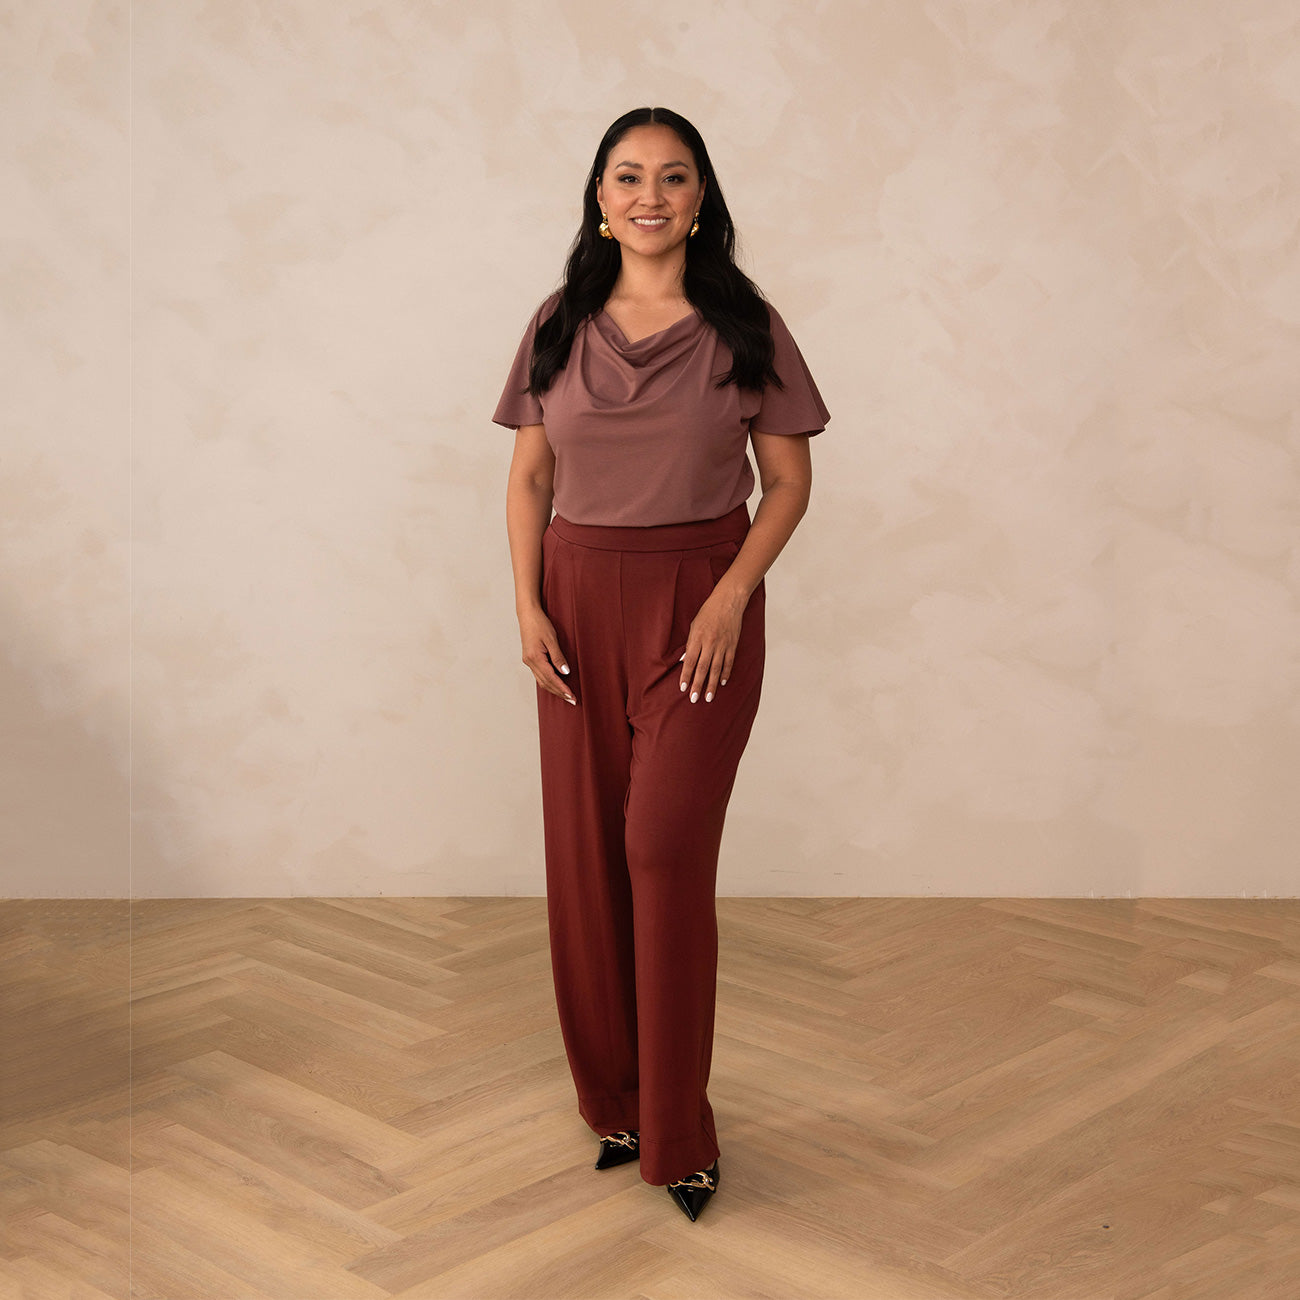 Wide leg pants with a high waist in Tencel and Organic Cotton Stretch –  Sandmaiden Sleepwear